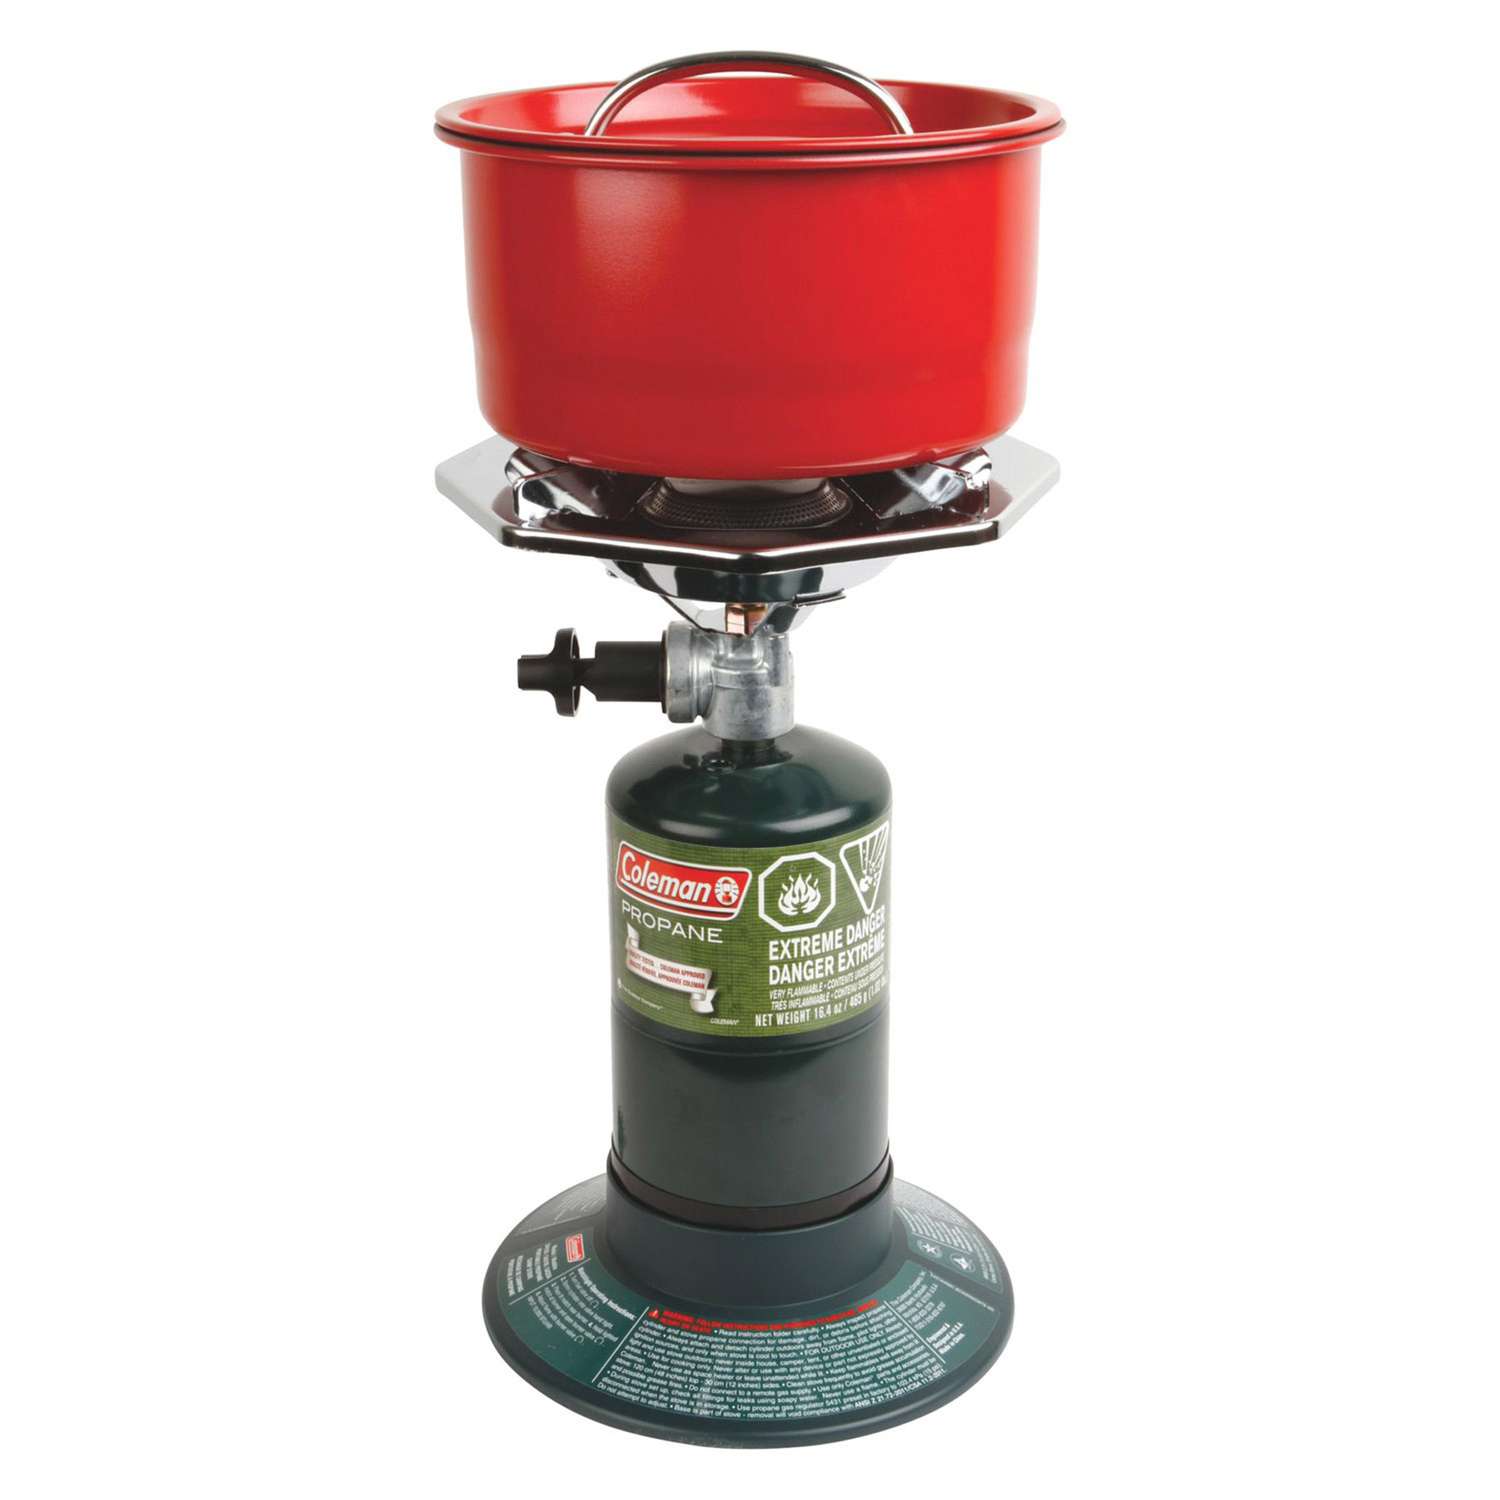 Coleman Portable Propane Lantern  Up to $5.00 Off w/ Free Shipping